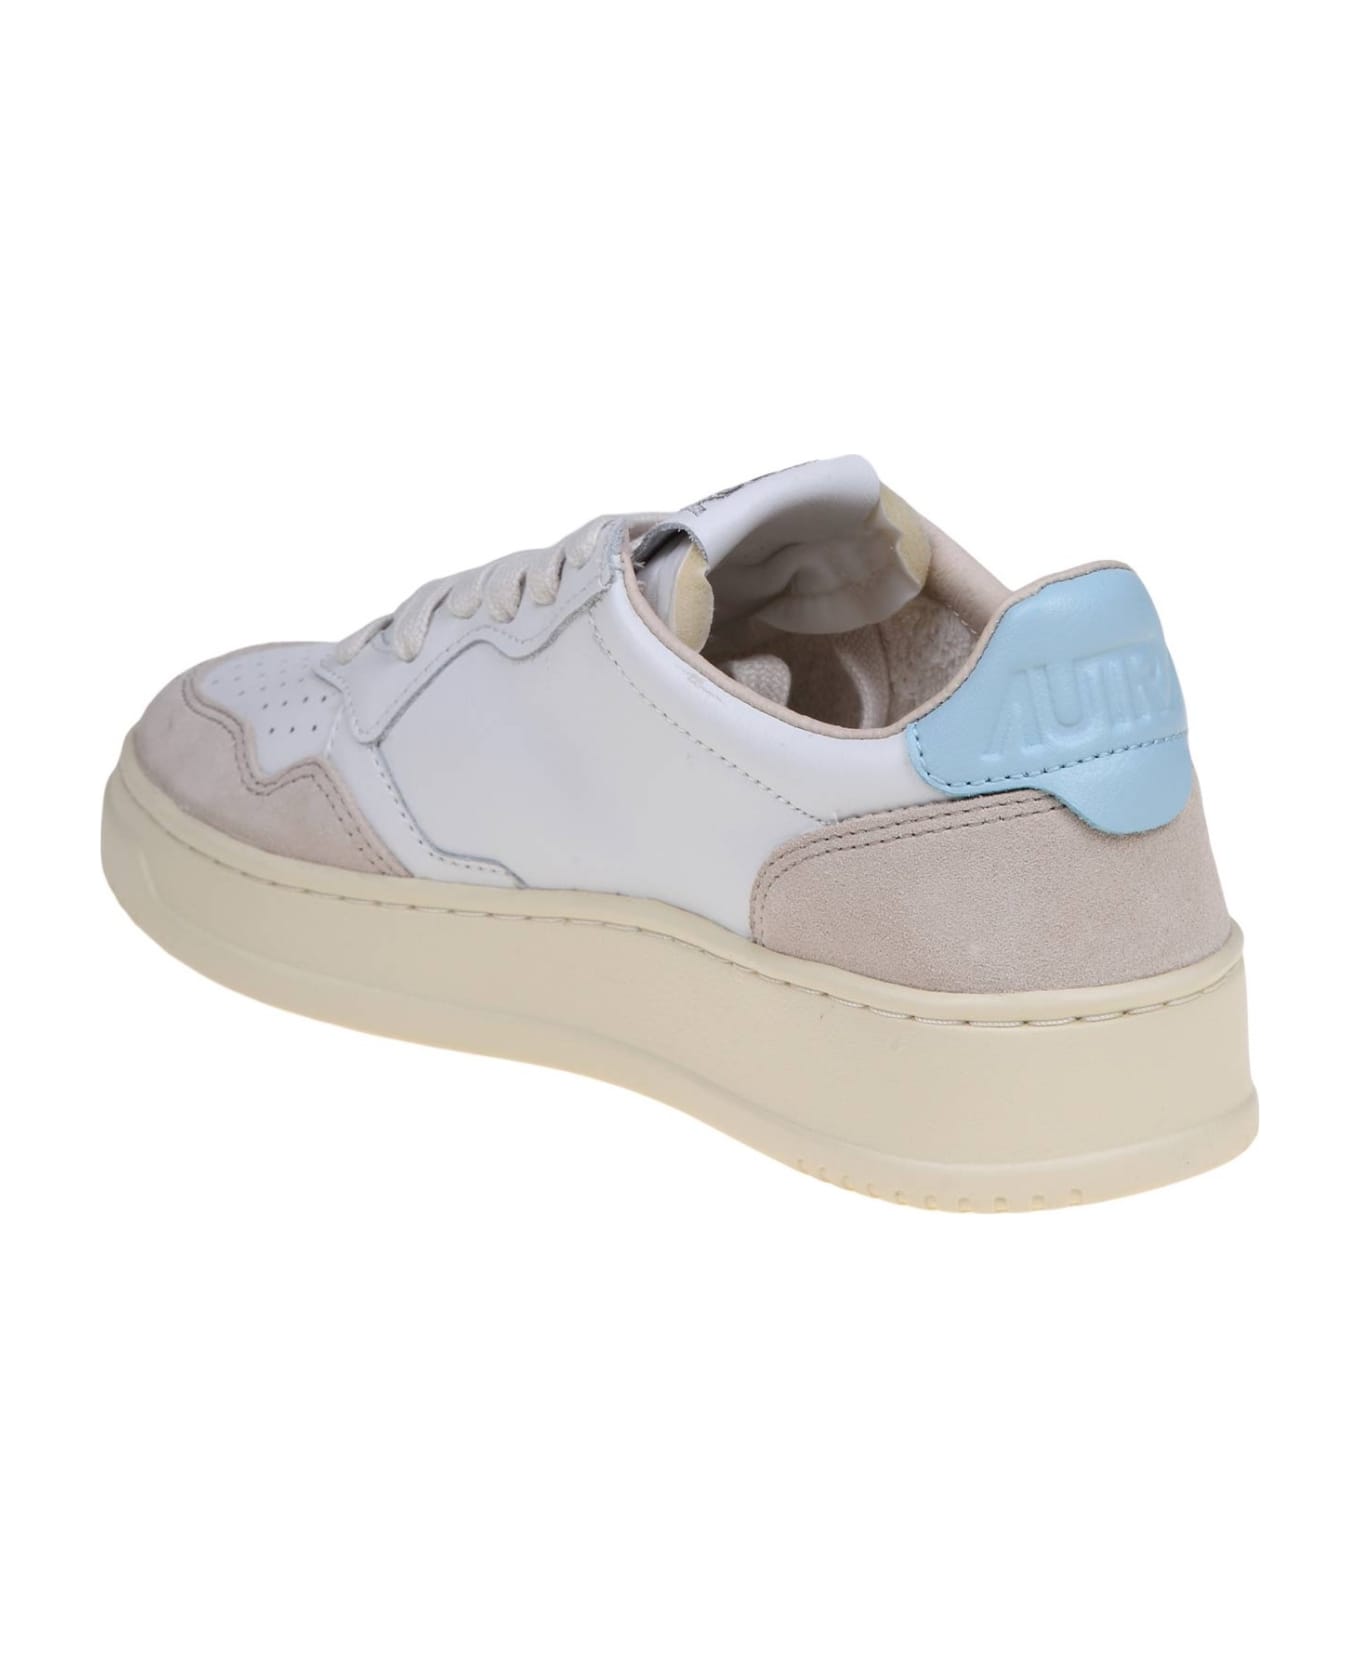 Autry White And Light Blue Leather Sneakers - Clear Blue スニーカー